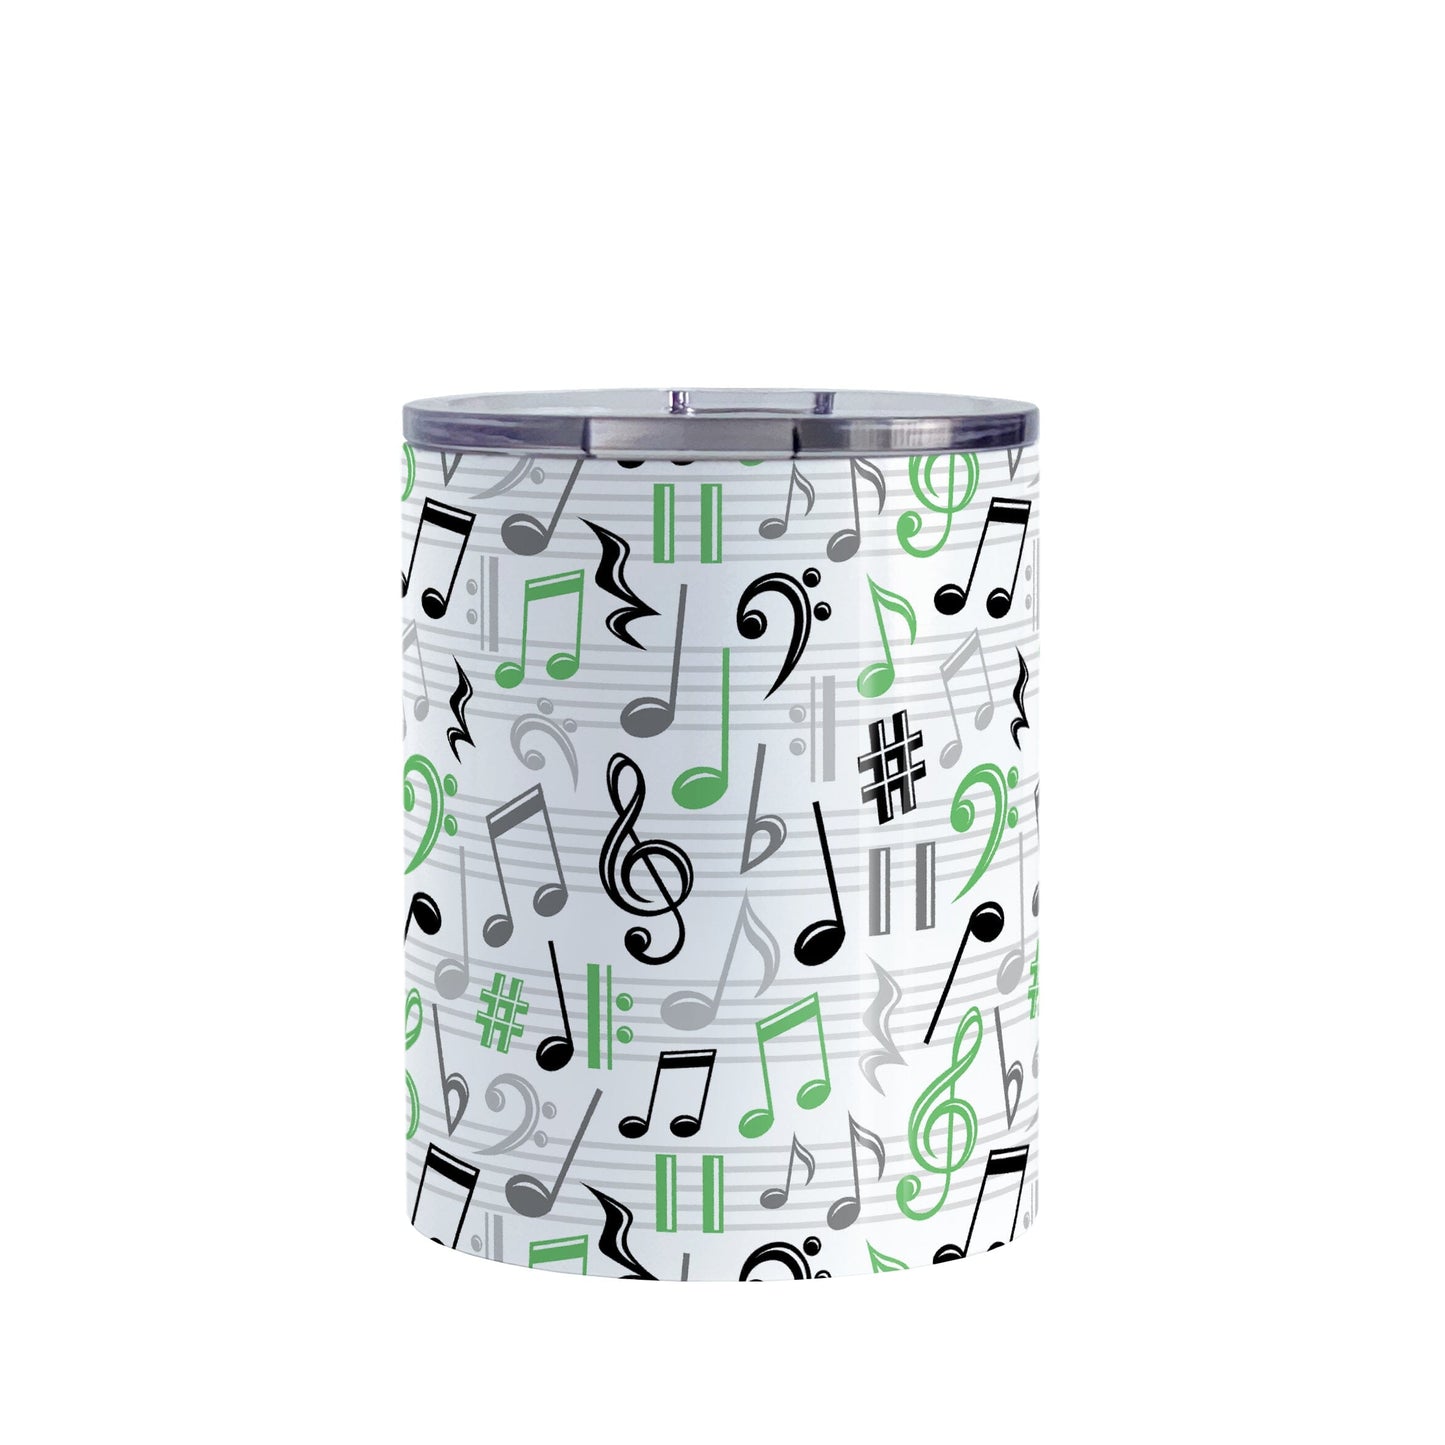 Green Music Notes Pattern Tumbler Cup (10oz) at Amy's Coffee Mugs. A stainless steel tumbler cup designed with music notes and symbols in green, black, and gray in a pattern that wraps around the cup.